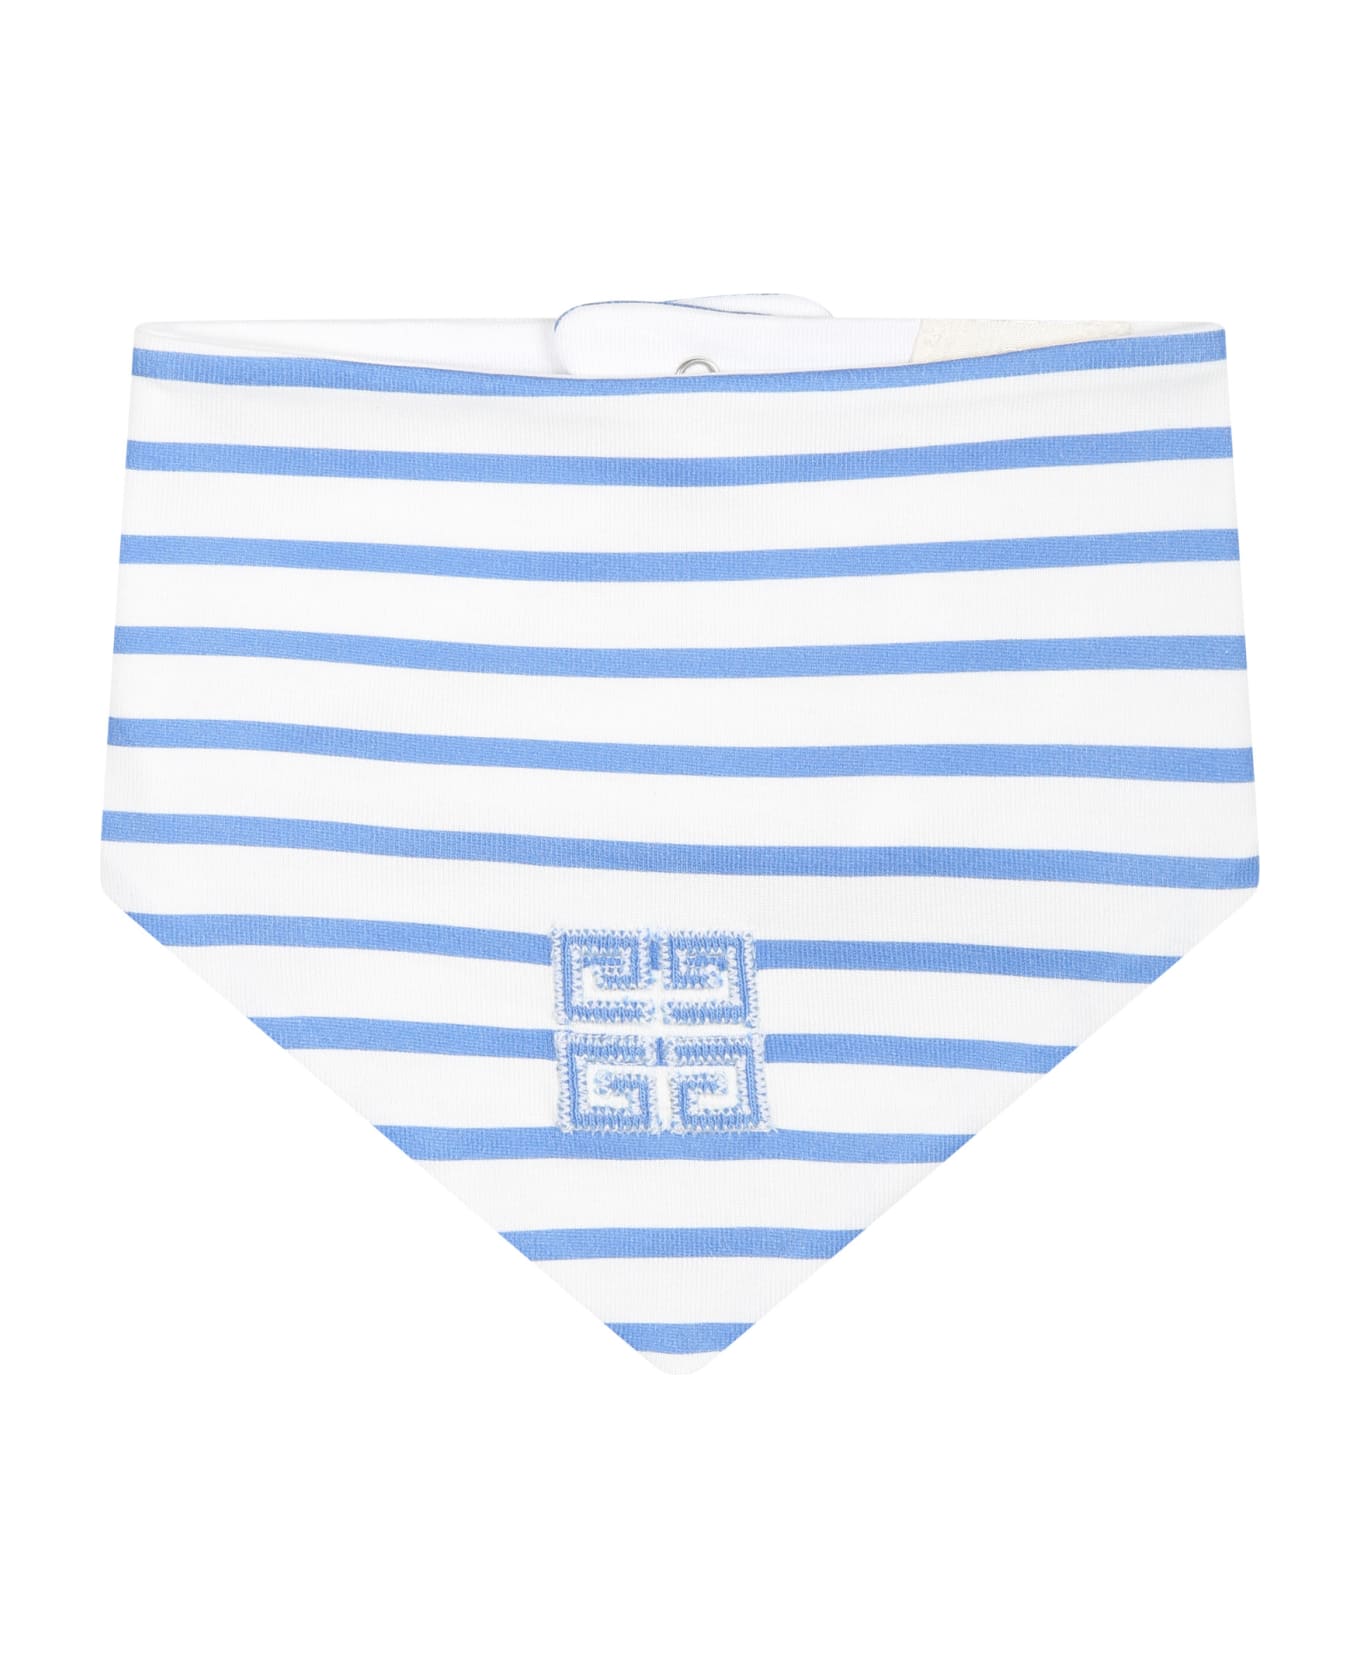 Givenchy Light Blue Romper For Baby Boy With Stripes And Logo - Light Blue